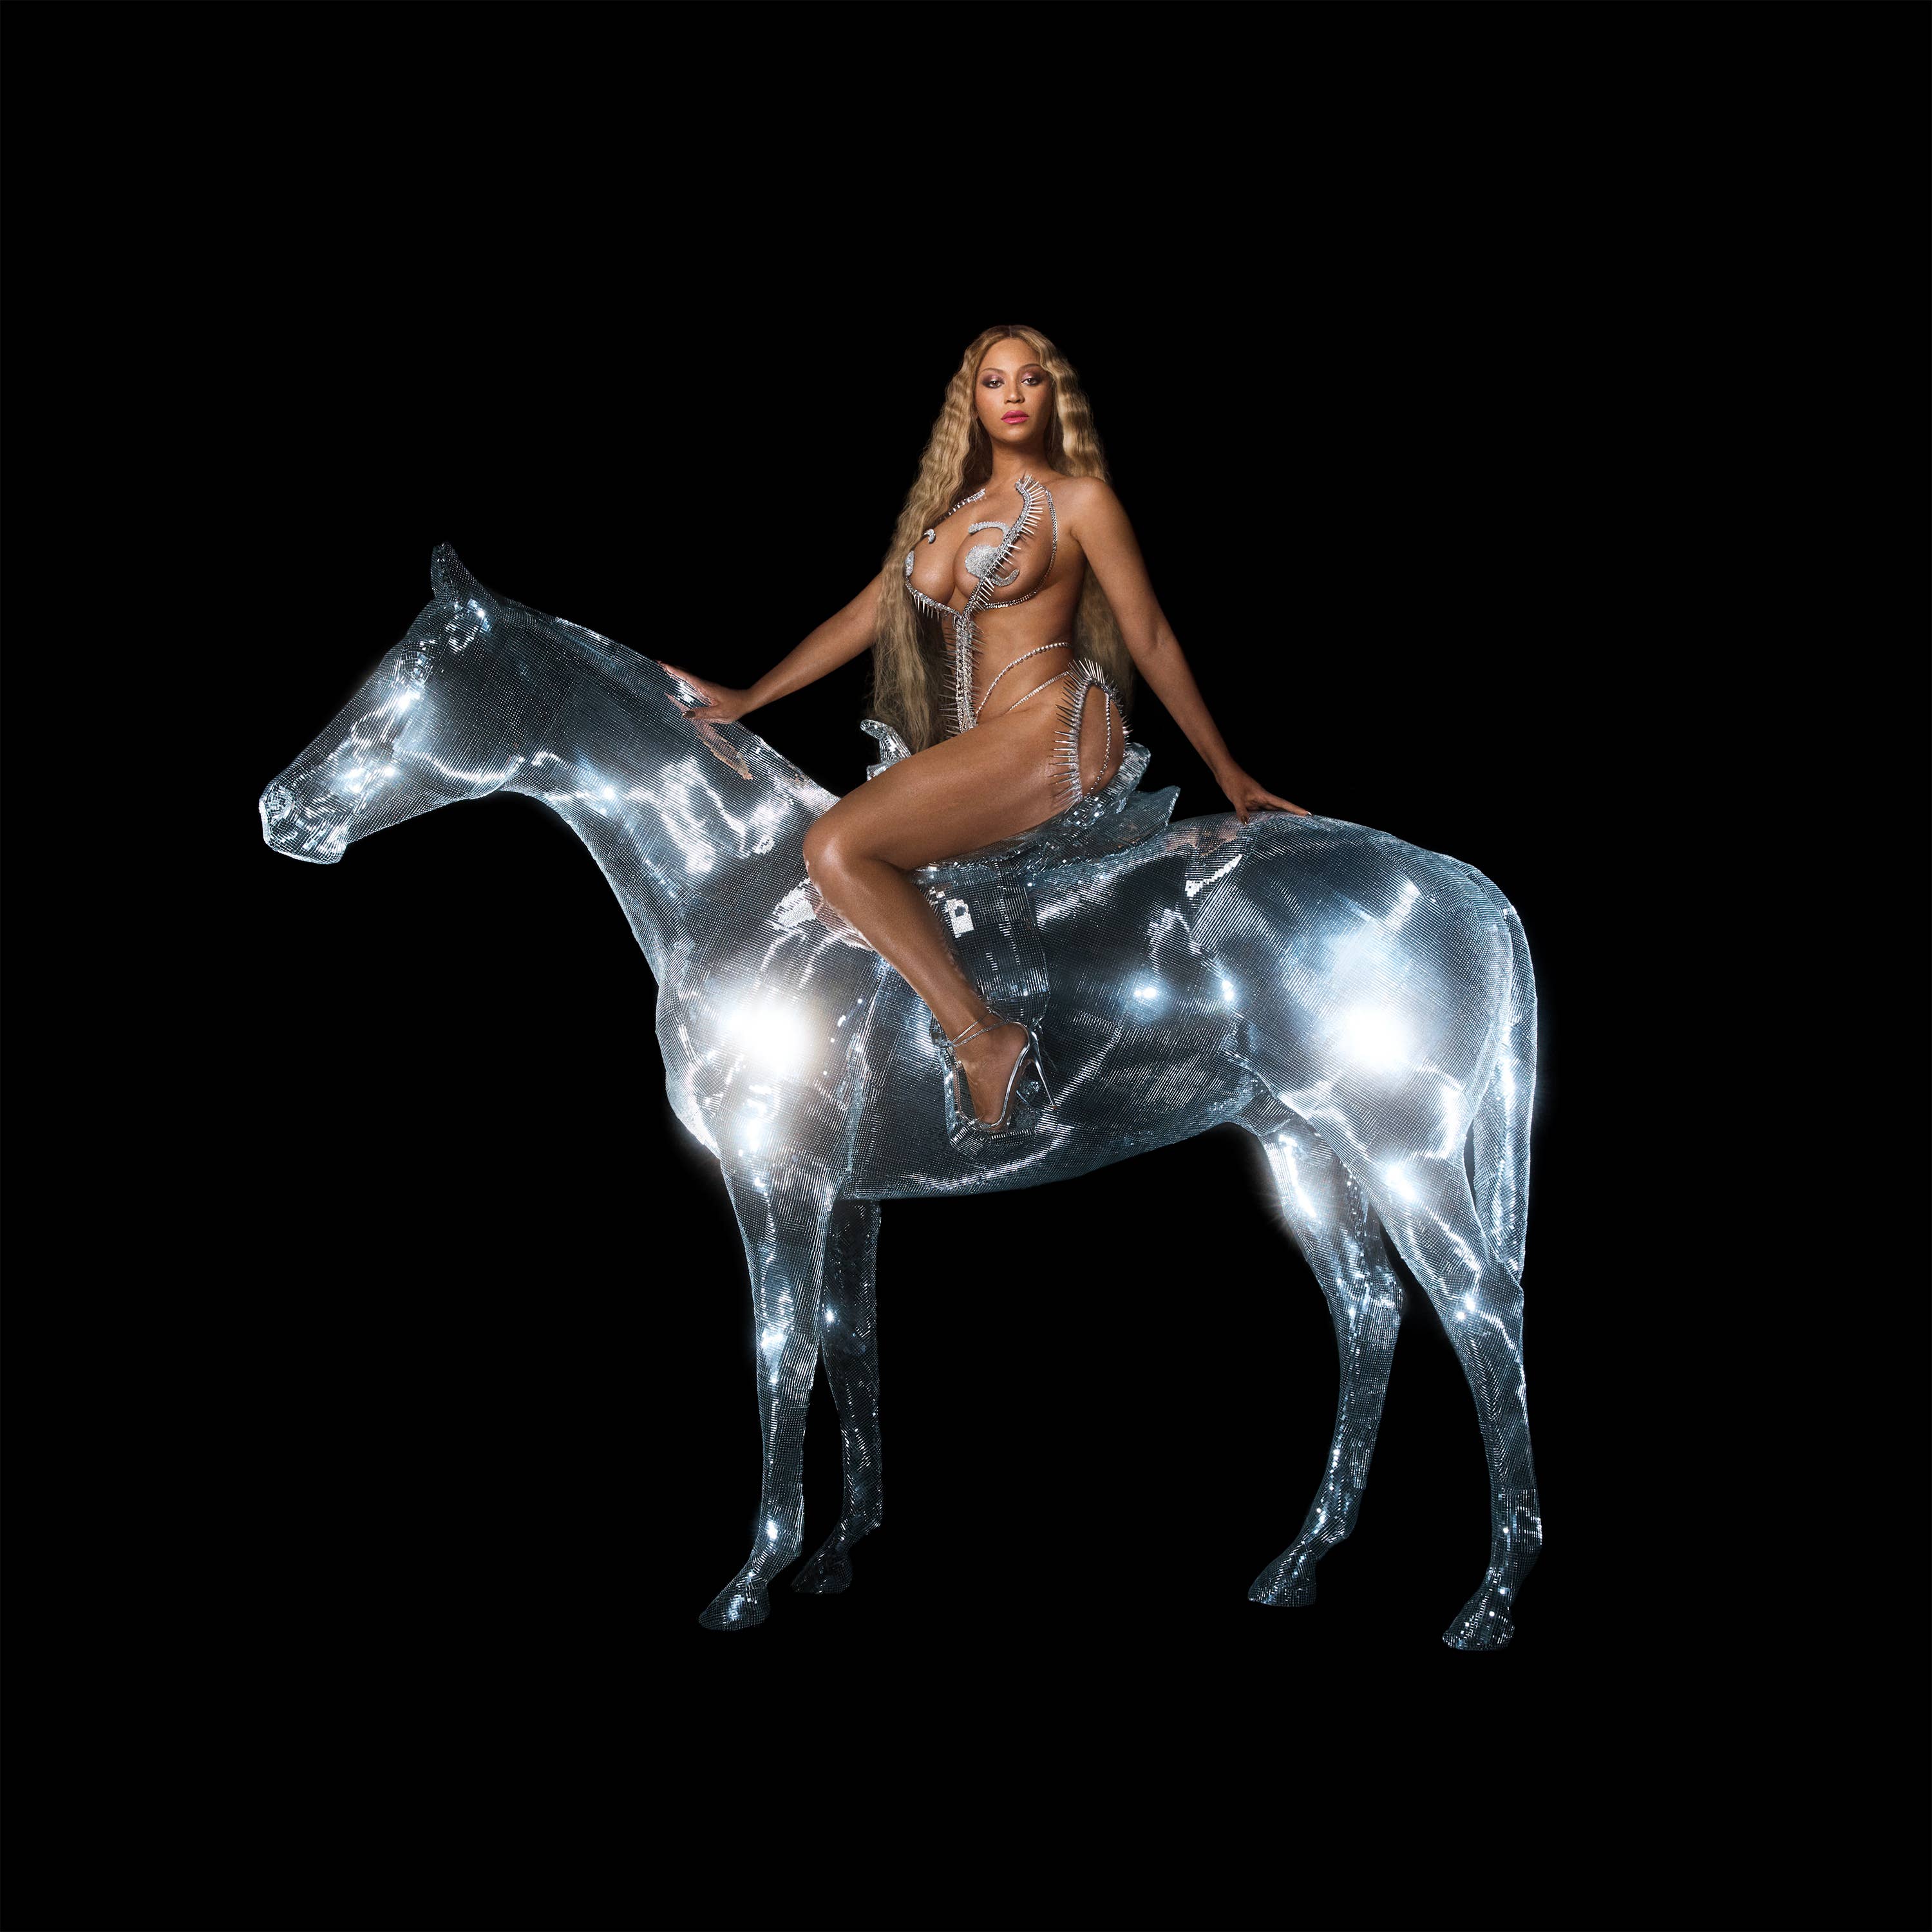 Beyonce's 2022 album art for July 29